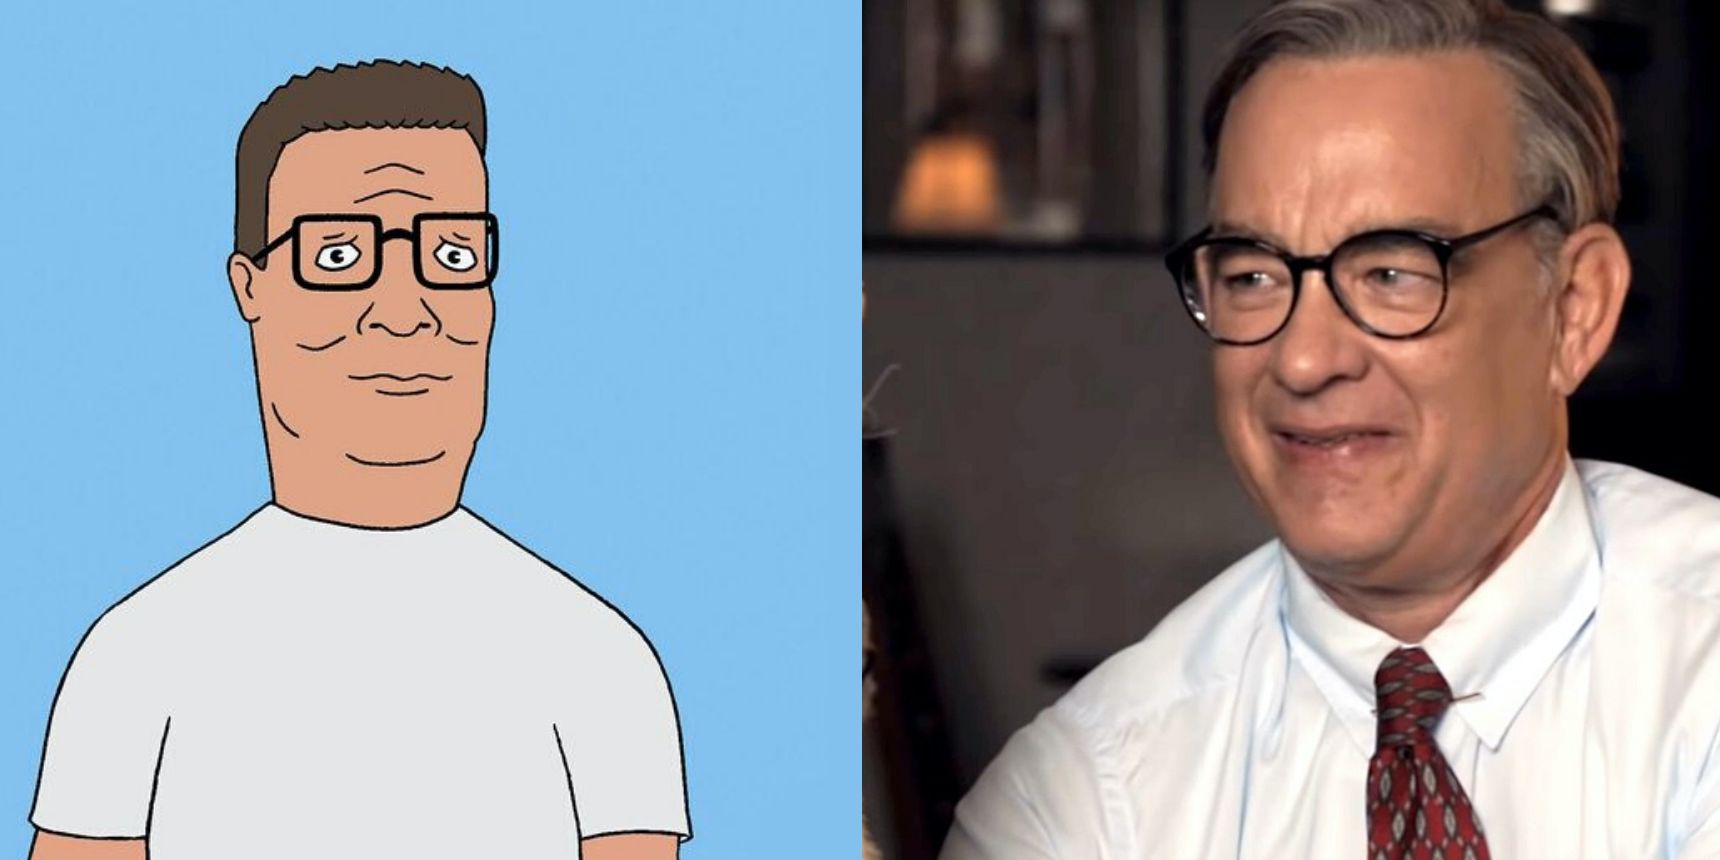 Who Would Star In A Live-Action 'King Of The Hill' Movie?